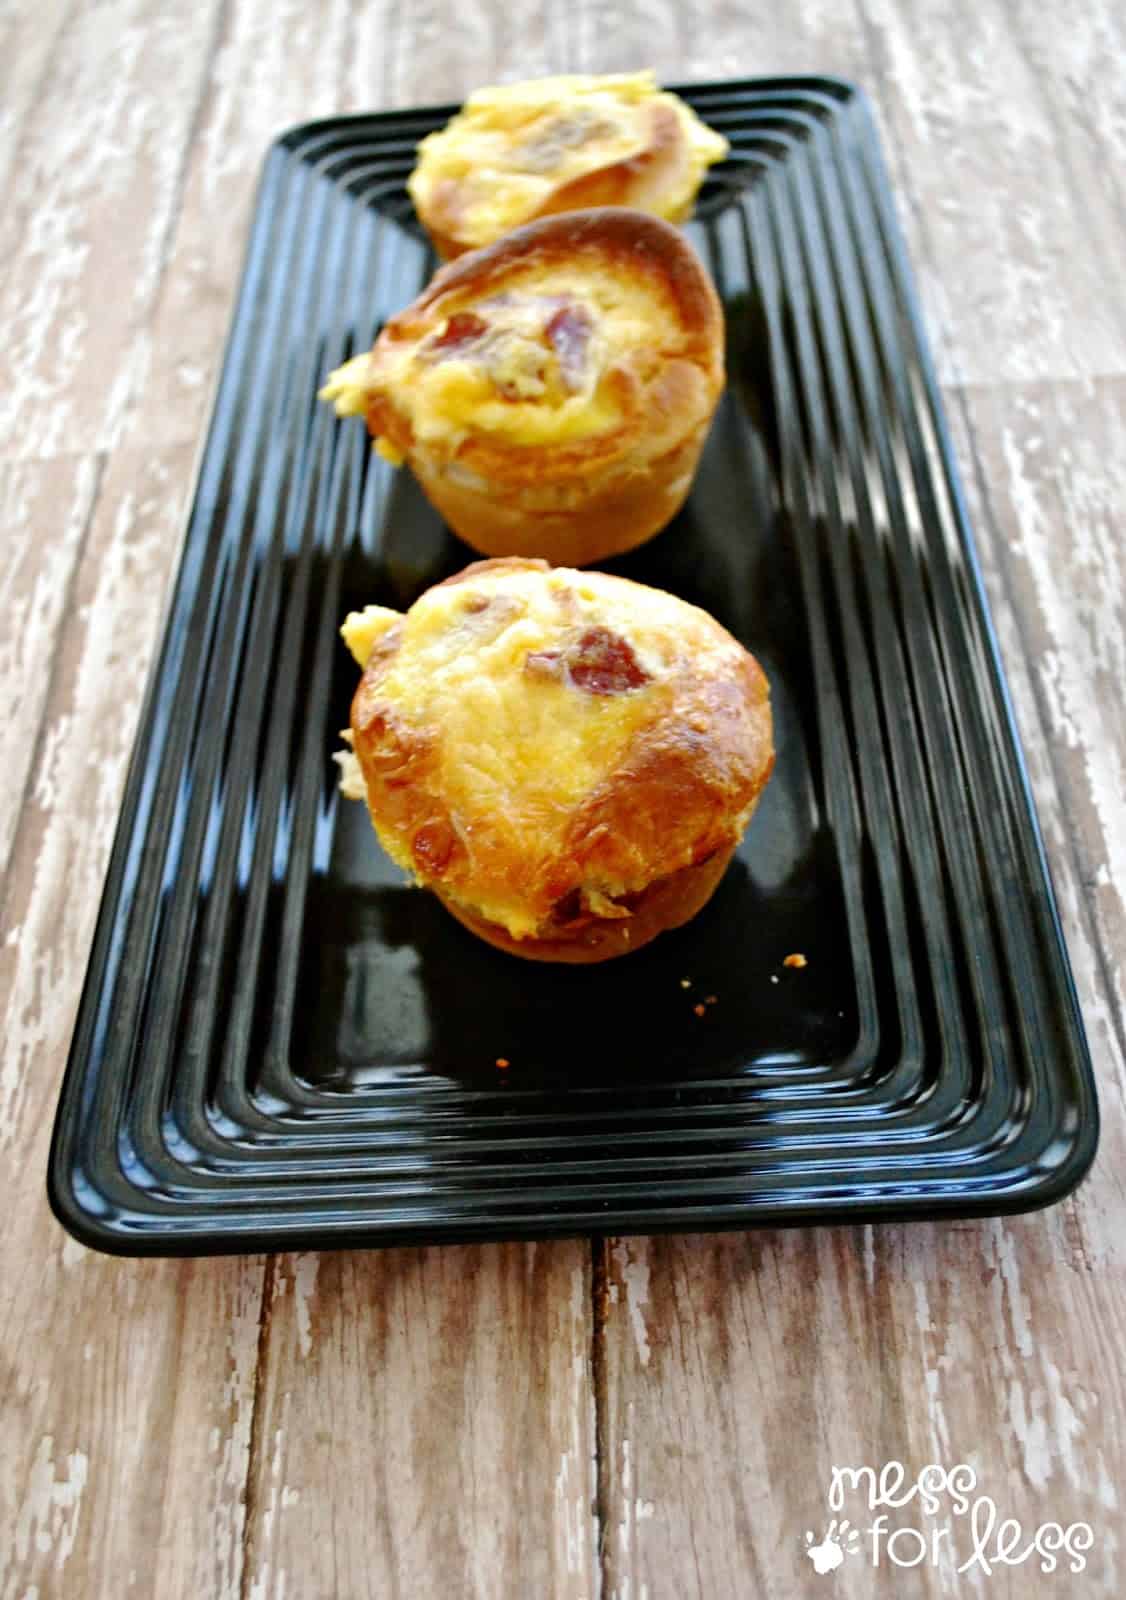 Turkey Bacon and Egg Breakfast Muffins with Butterball Turkey Bacon #sponsored